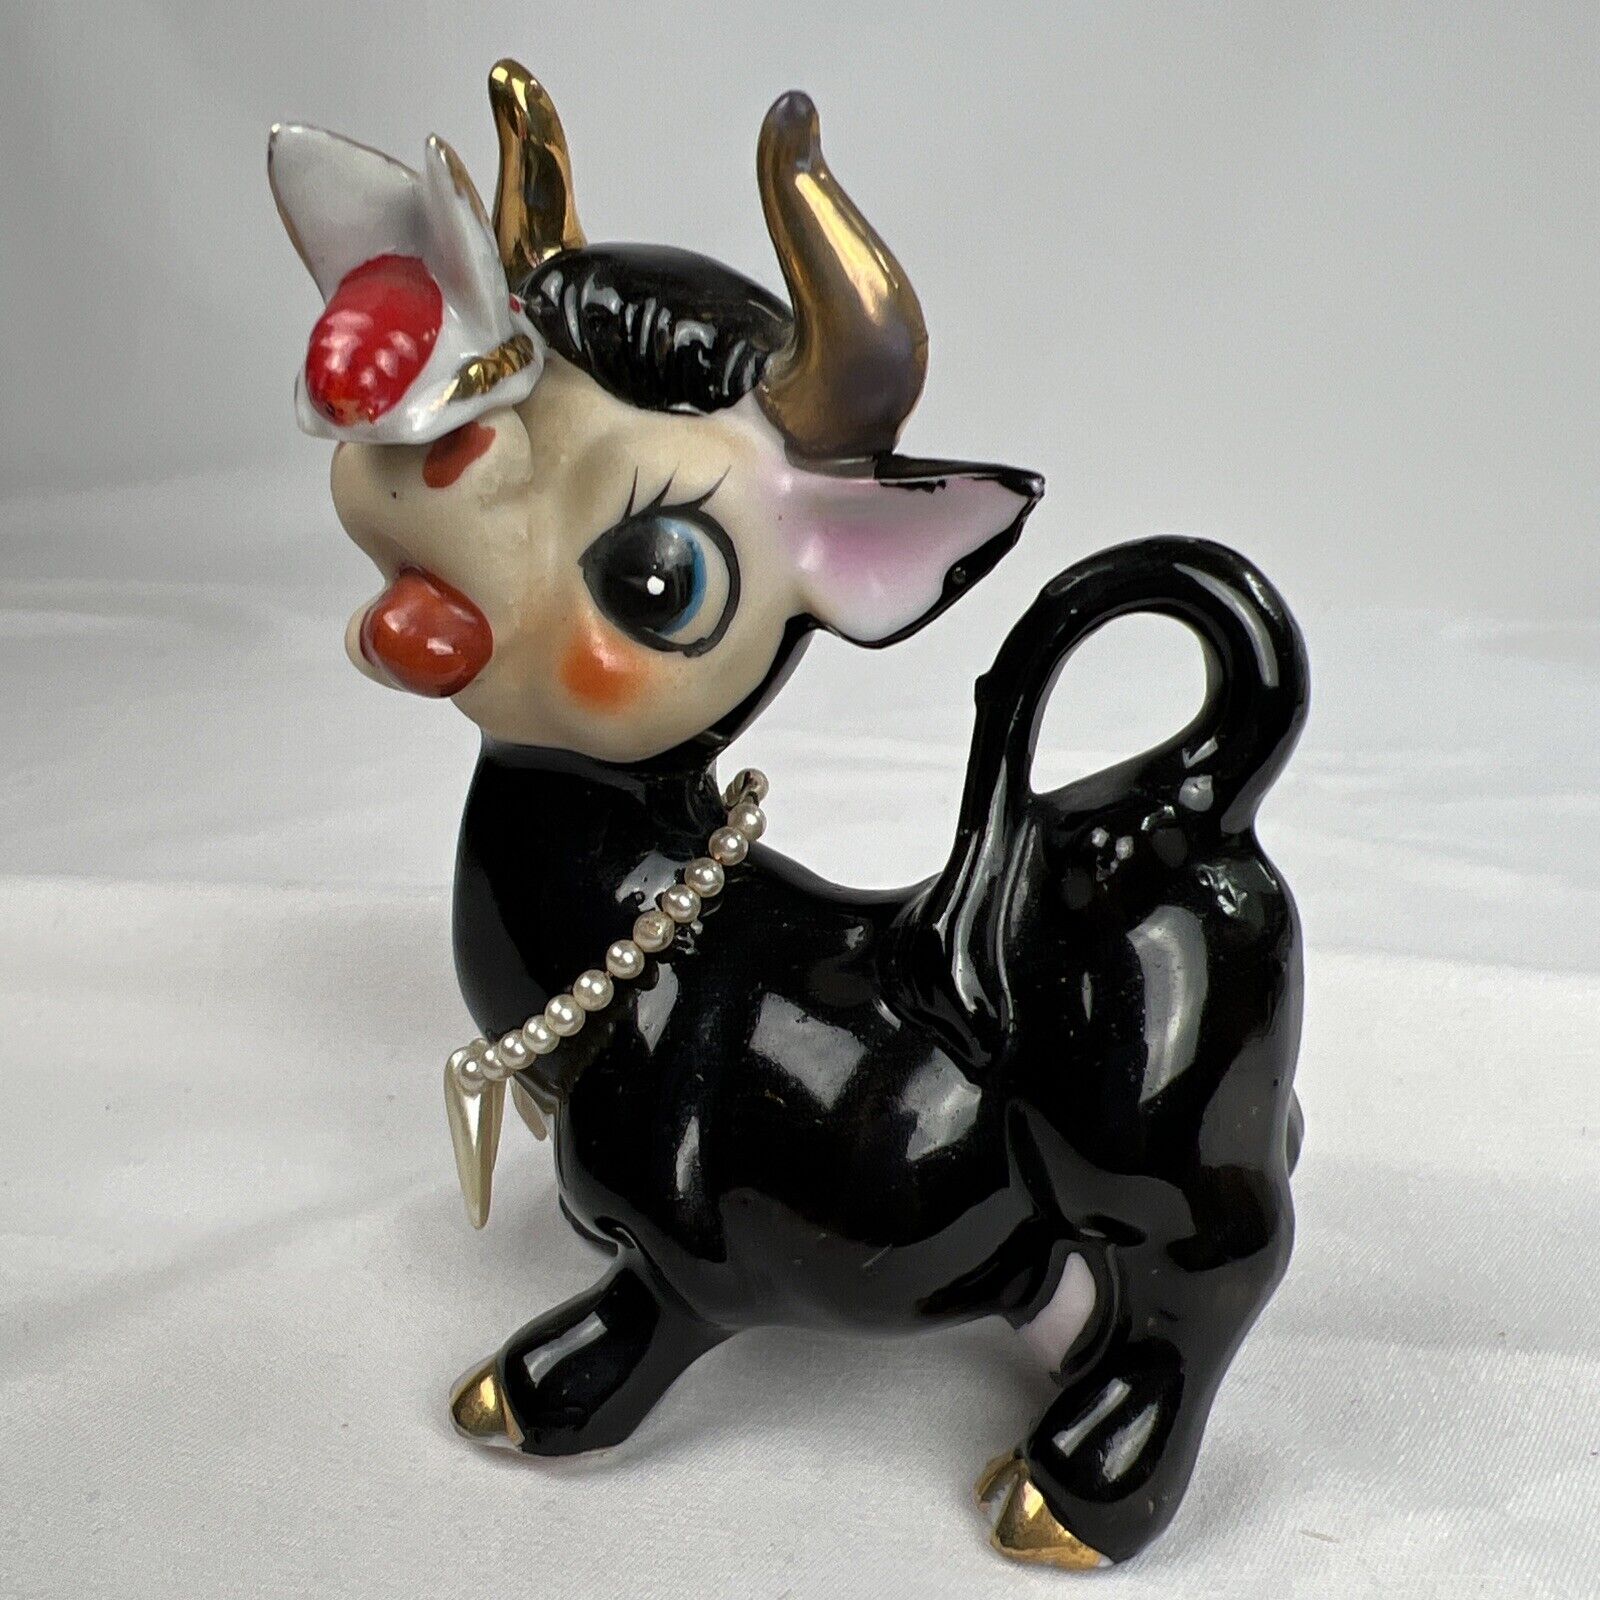 VTG Ucagco Ceramic Black Cow with A Butterfly Necklace Kitschy Self Sitter Colle